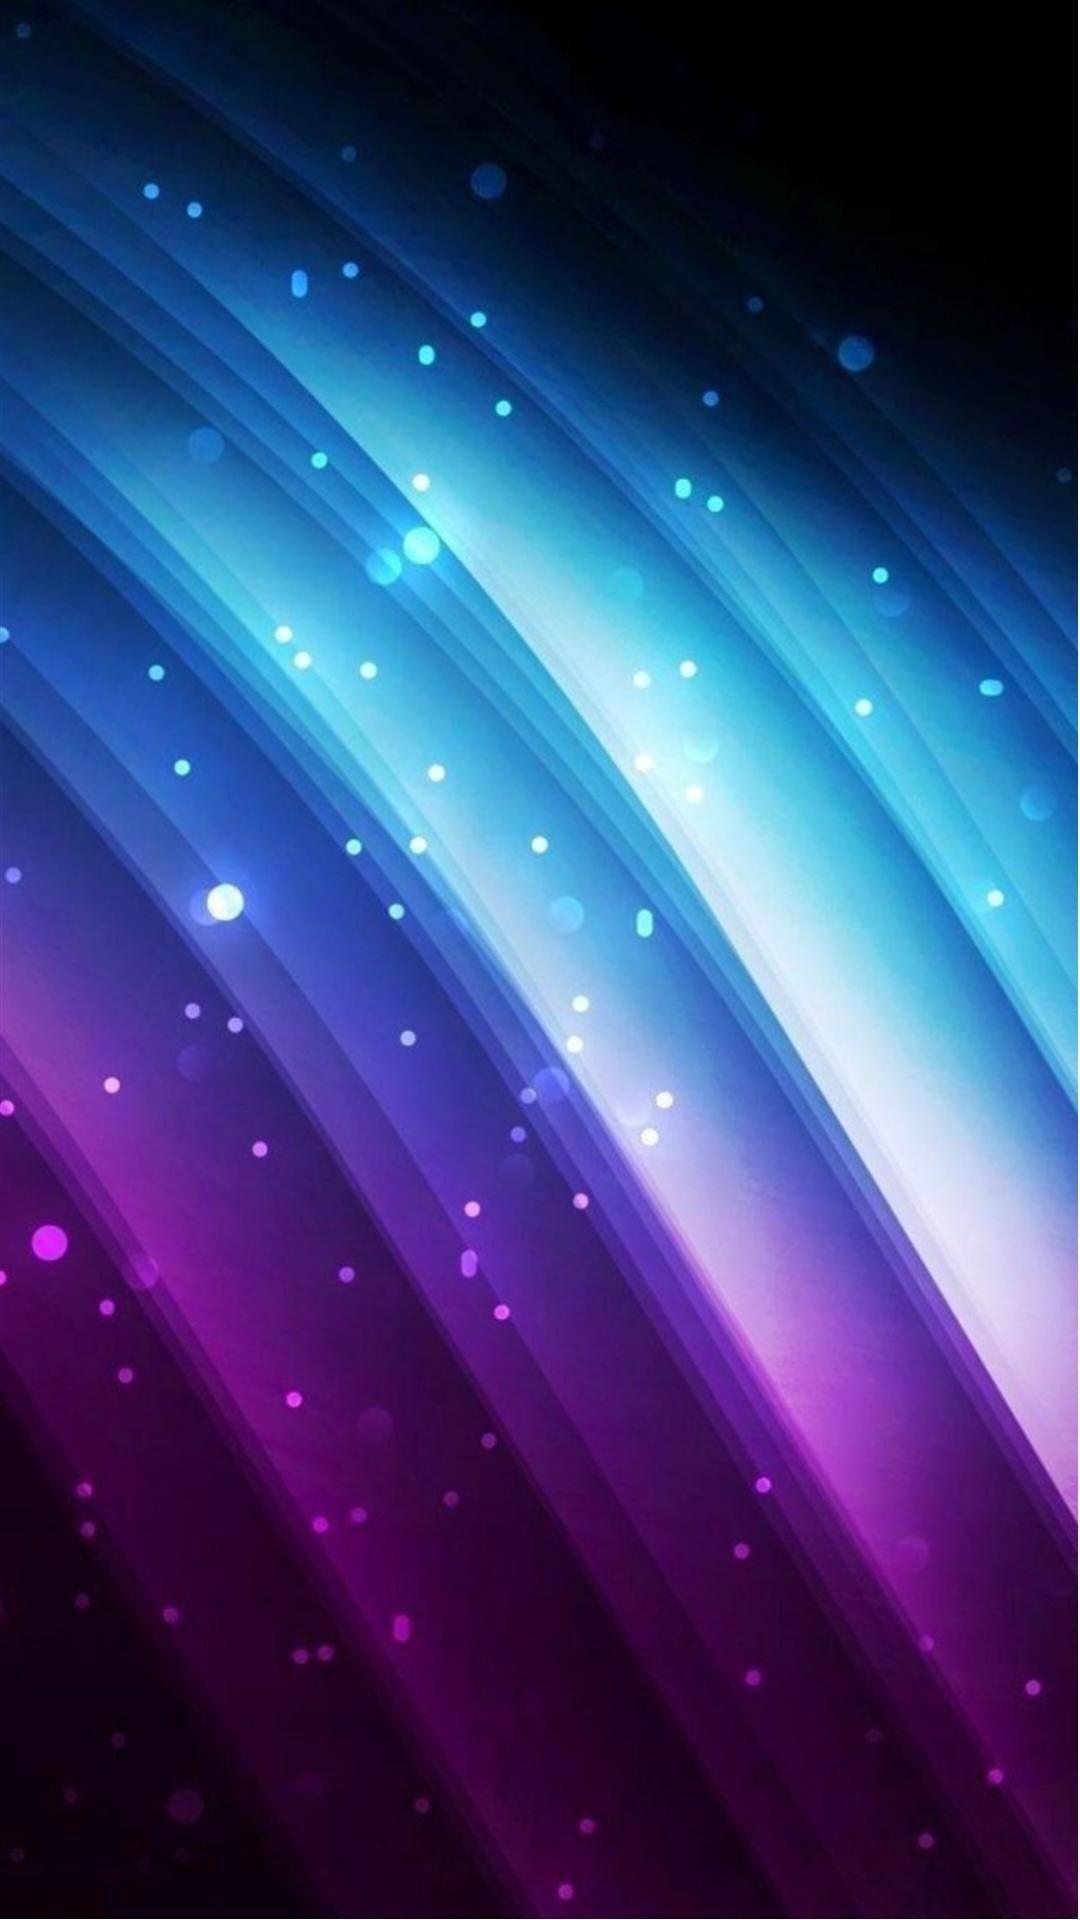 nokia mobile wallpapers